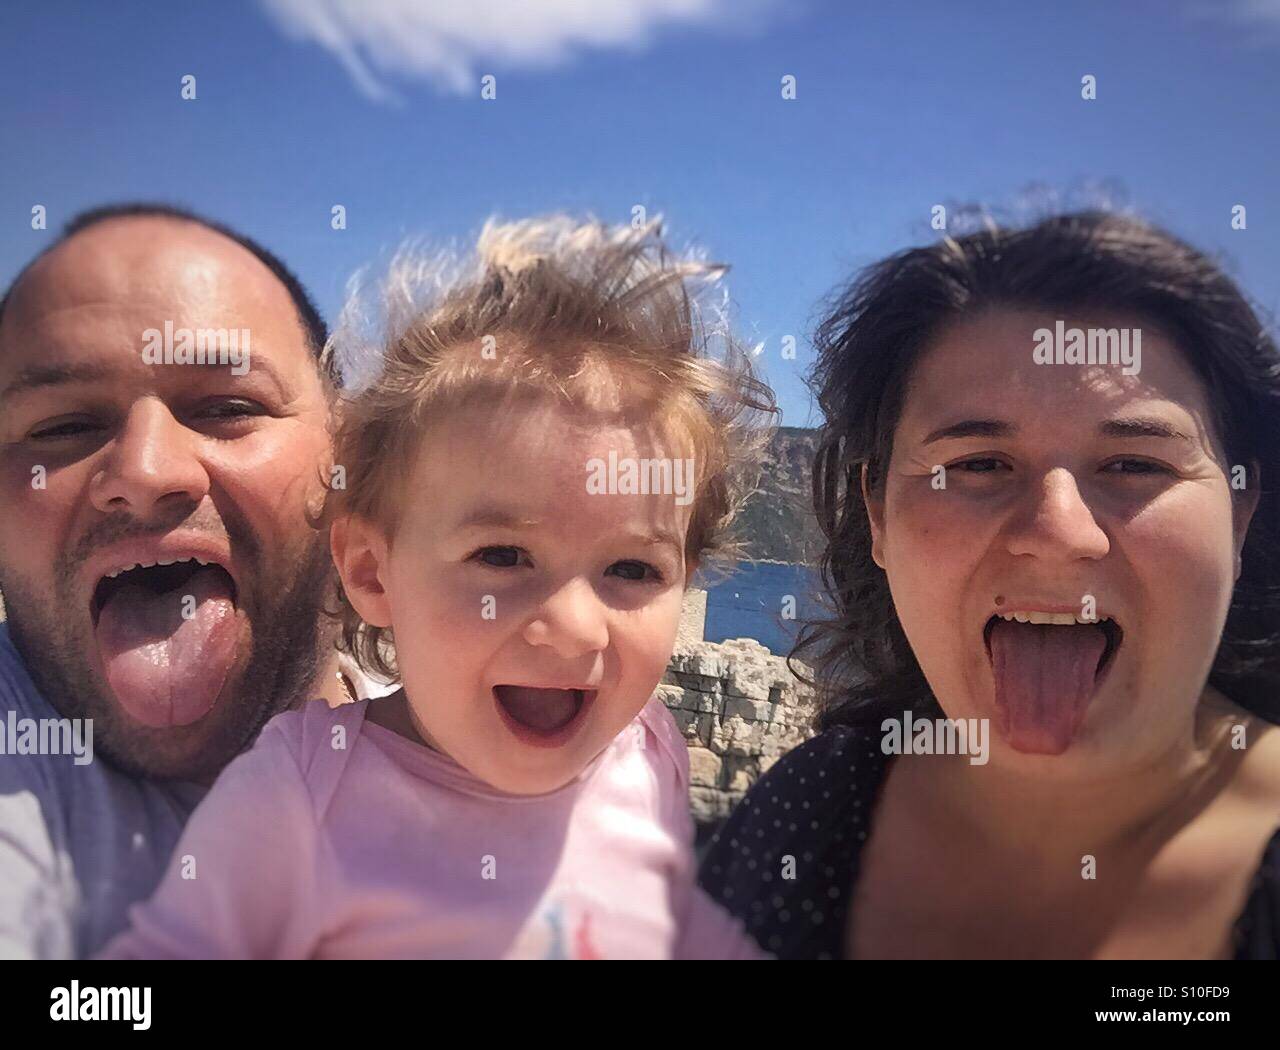 Family selfie portrait on holiday Stock Photo